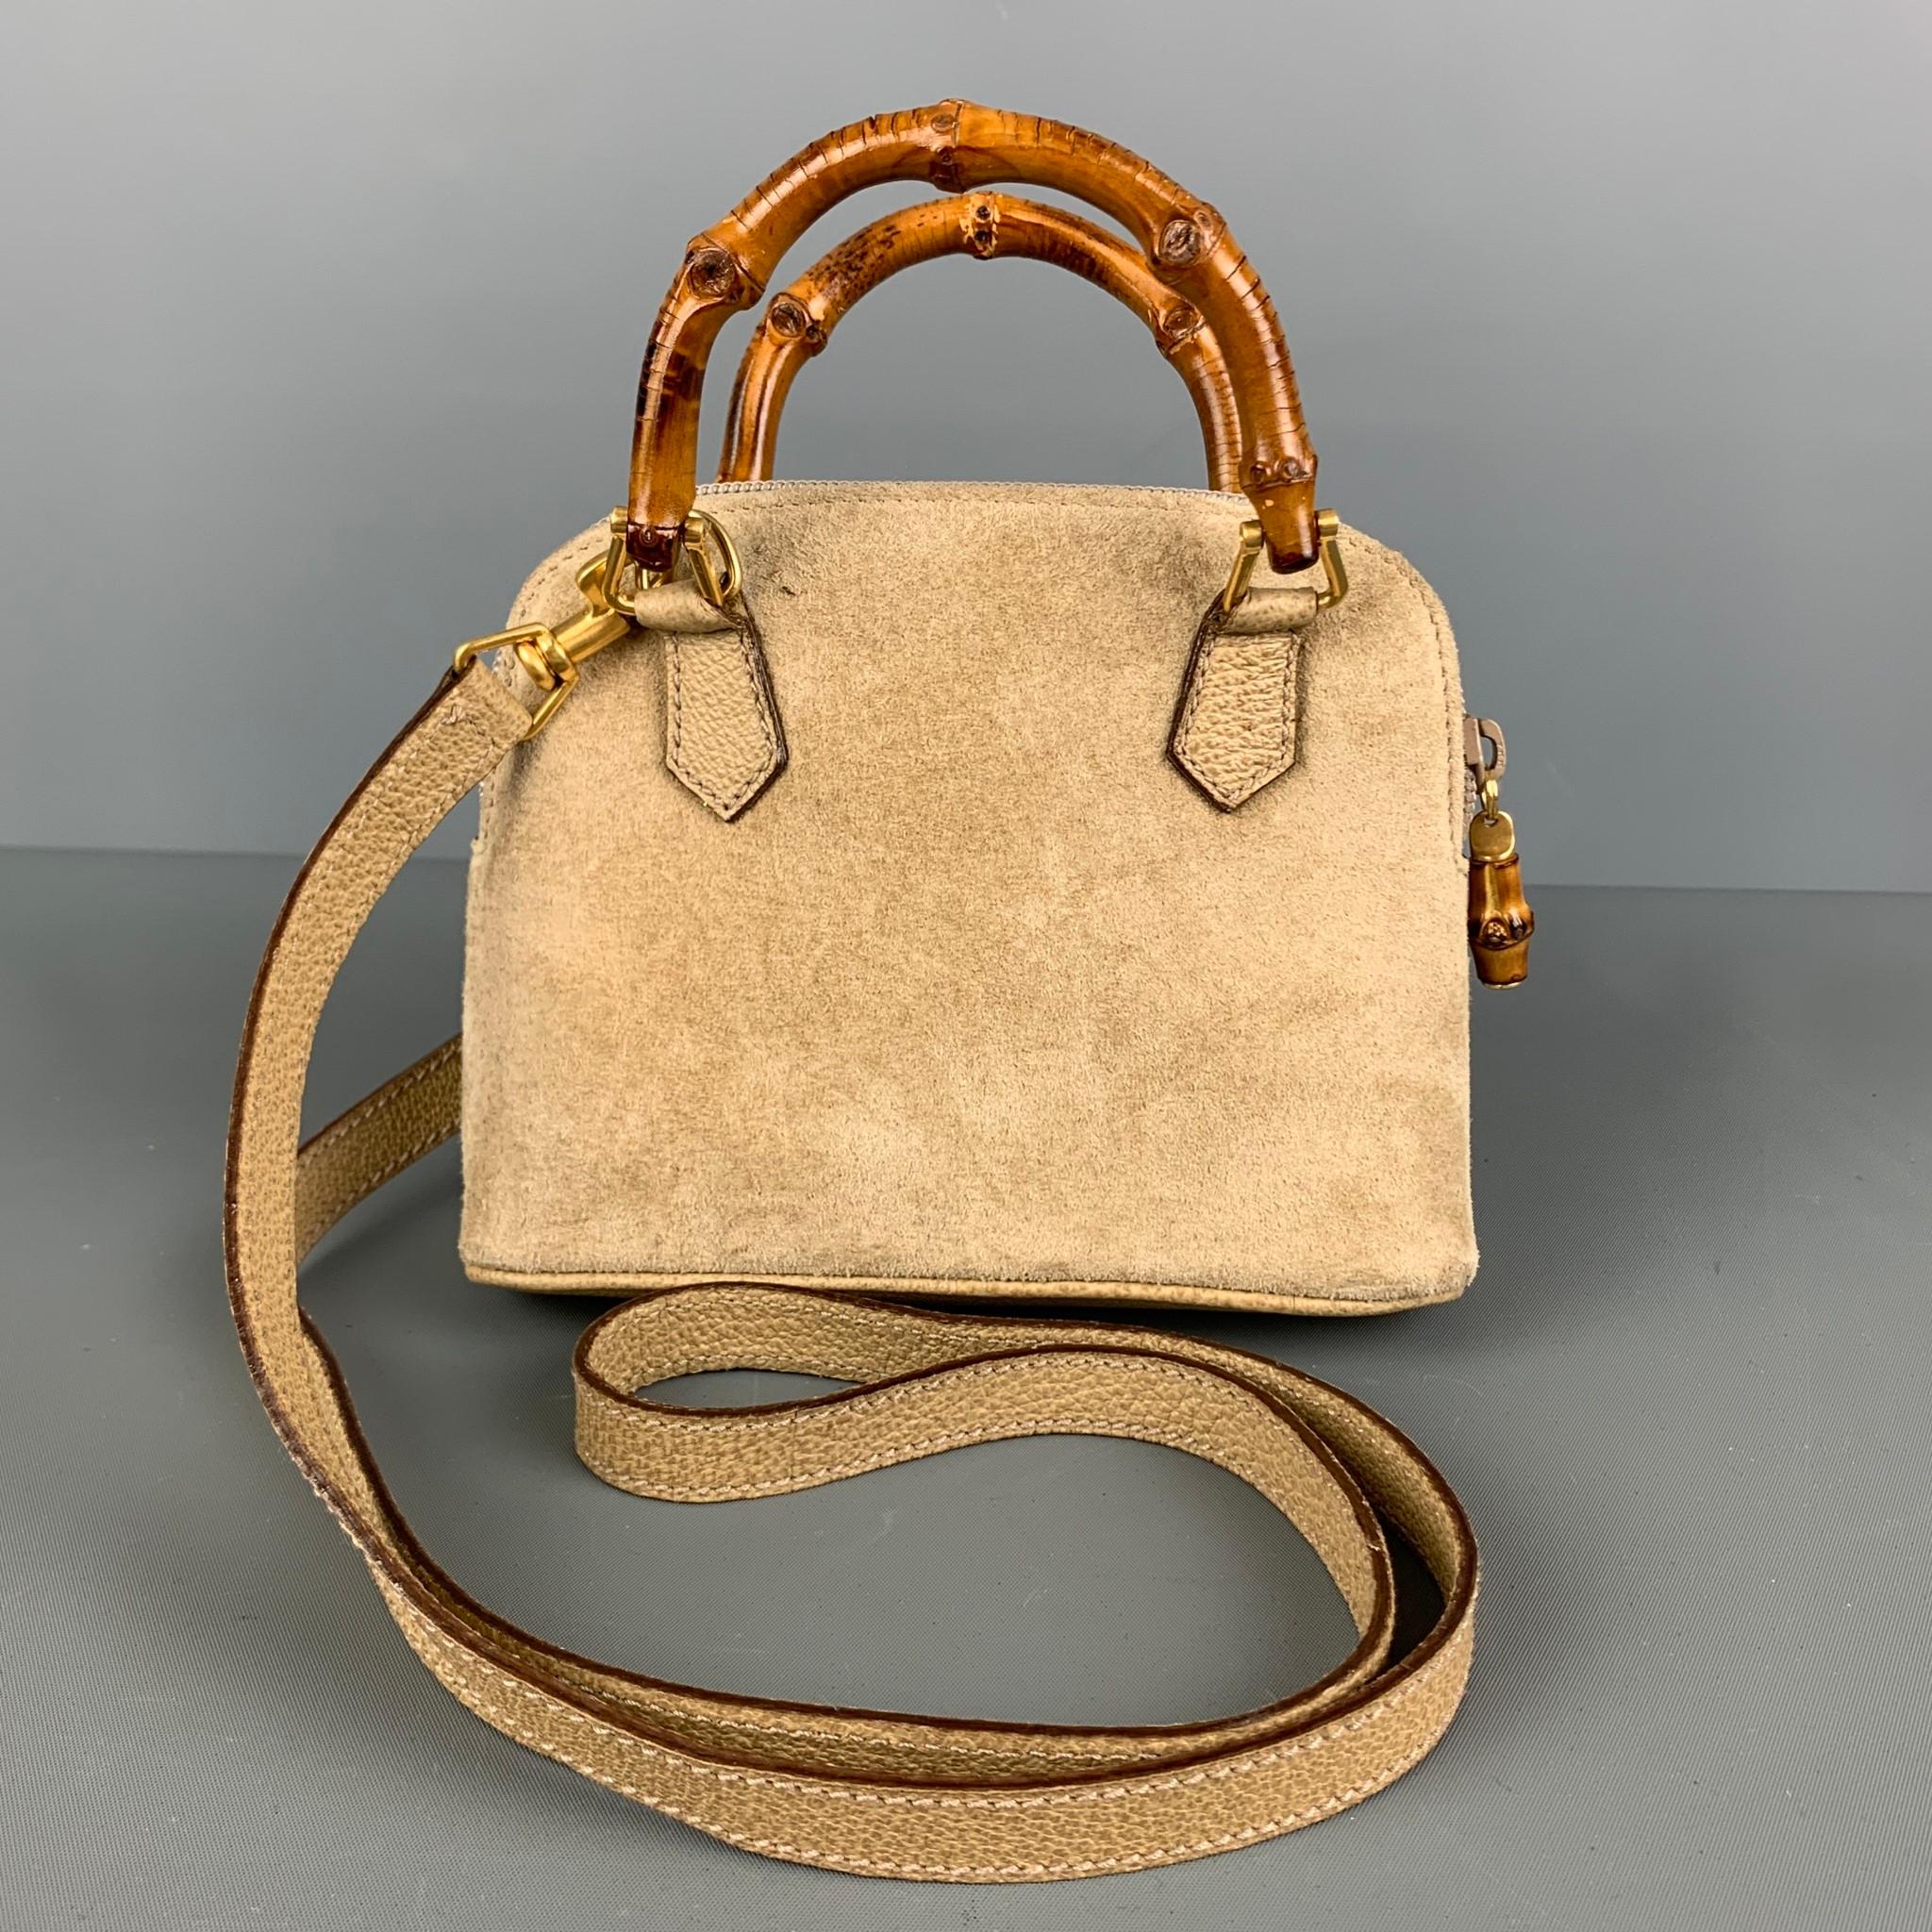 GUCCI mini crossbody bag comes in beige suede leather featuring a removable shoulder strap, inner zipper pocket, bamboo handle, and zipper closure. Comes with dust Bag. Made in Italy.

Very Good Pre-Owned Condition. Minor signs of